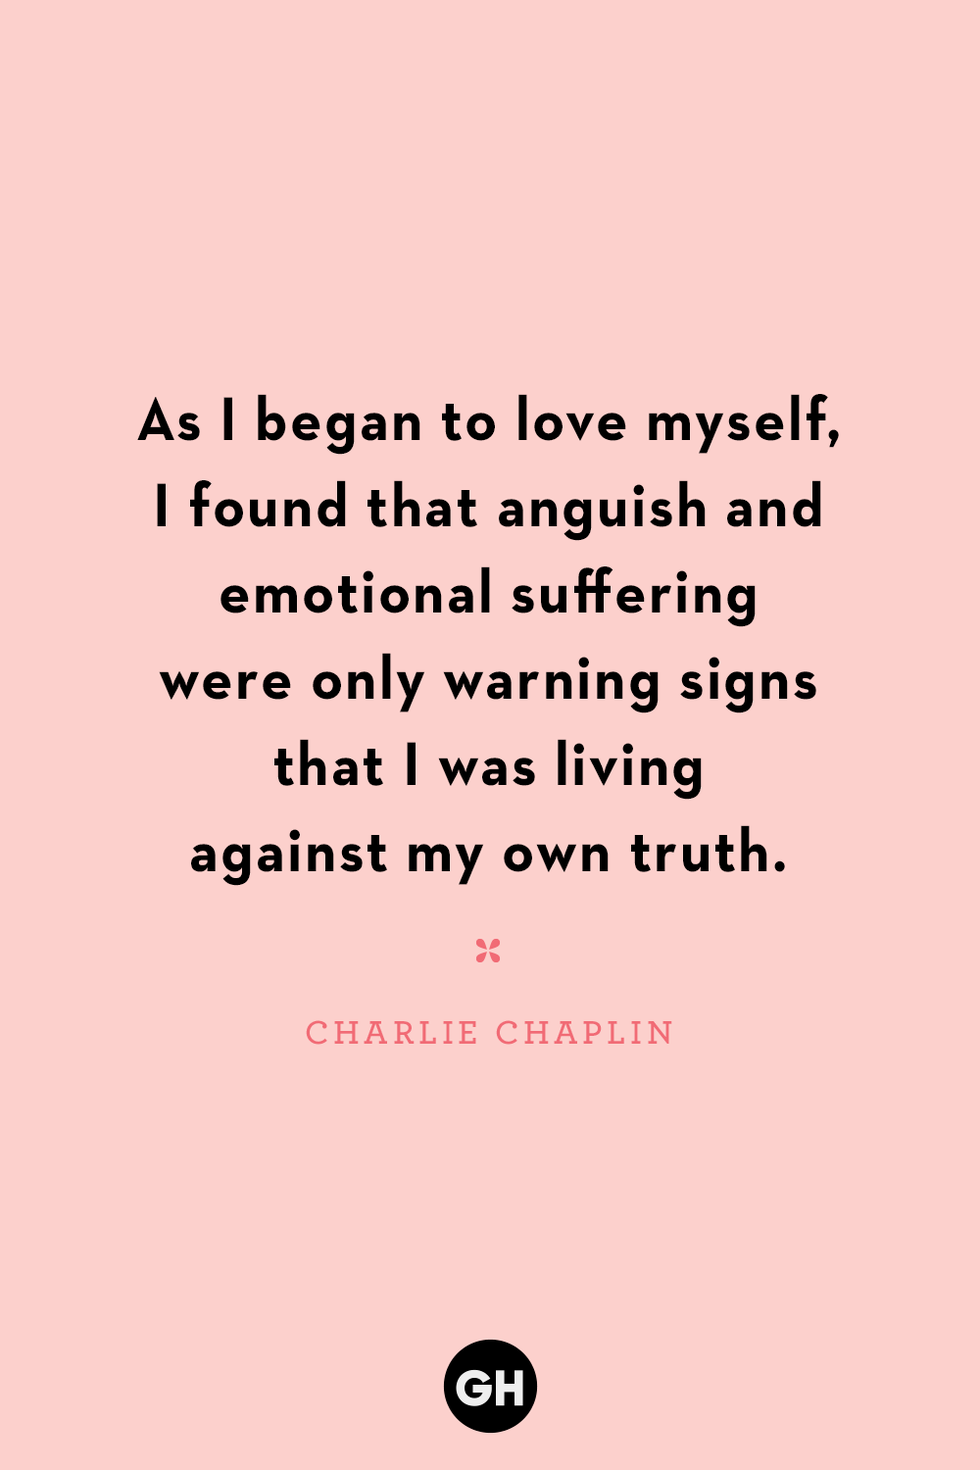 100 Best Self-Love Quotes To Empower You And Build Self-Esteem